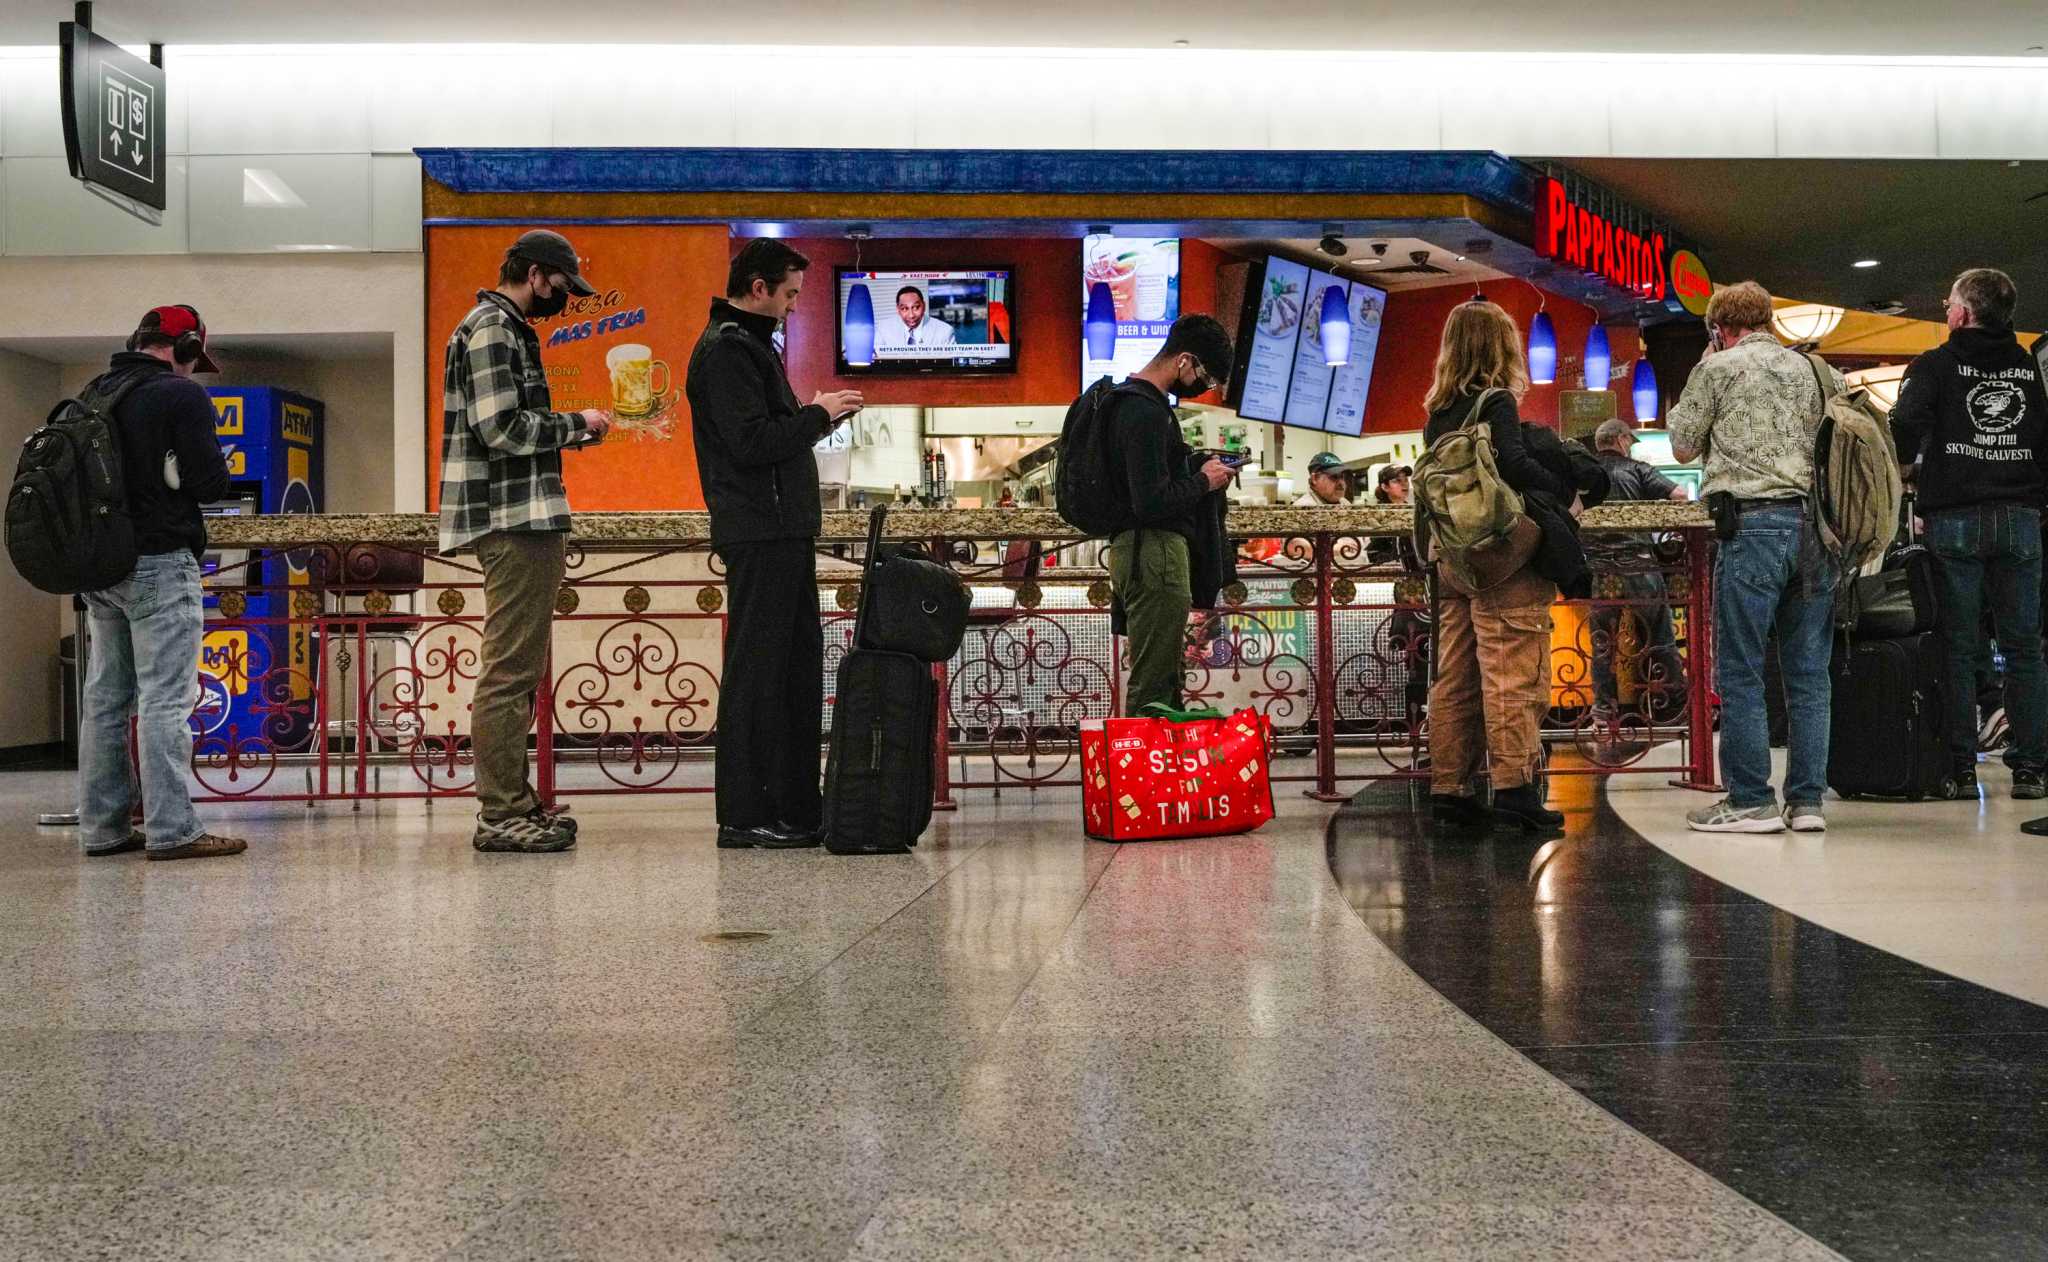 Houston Restaurant Group Alleges Malfeasance in City's Airport Contract  Award, Issues